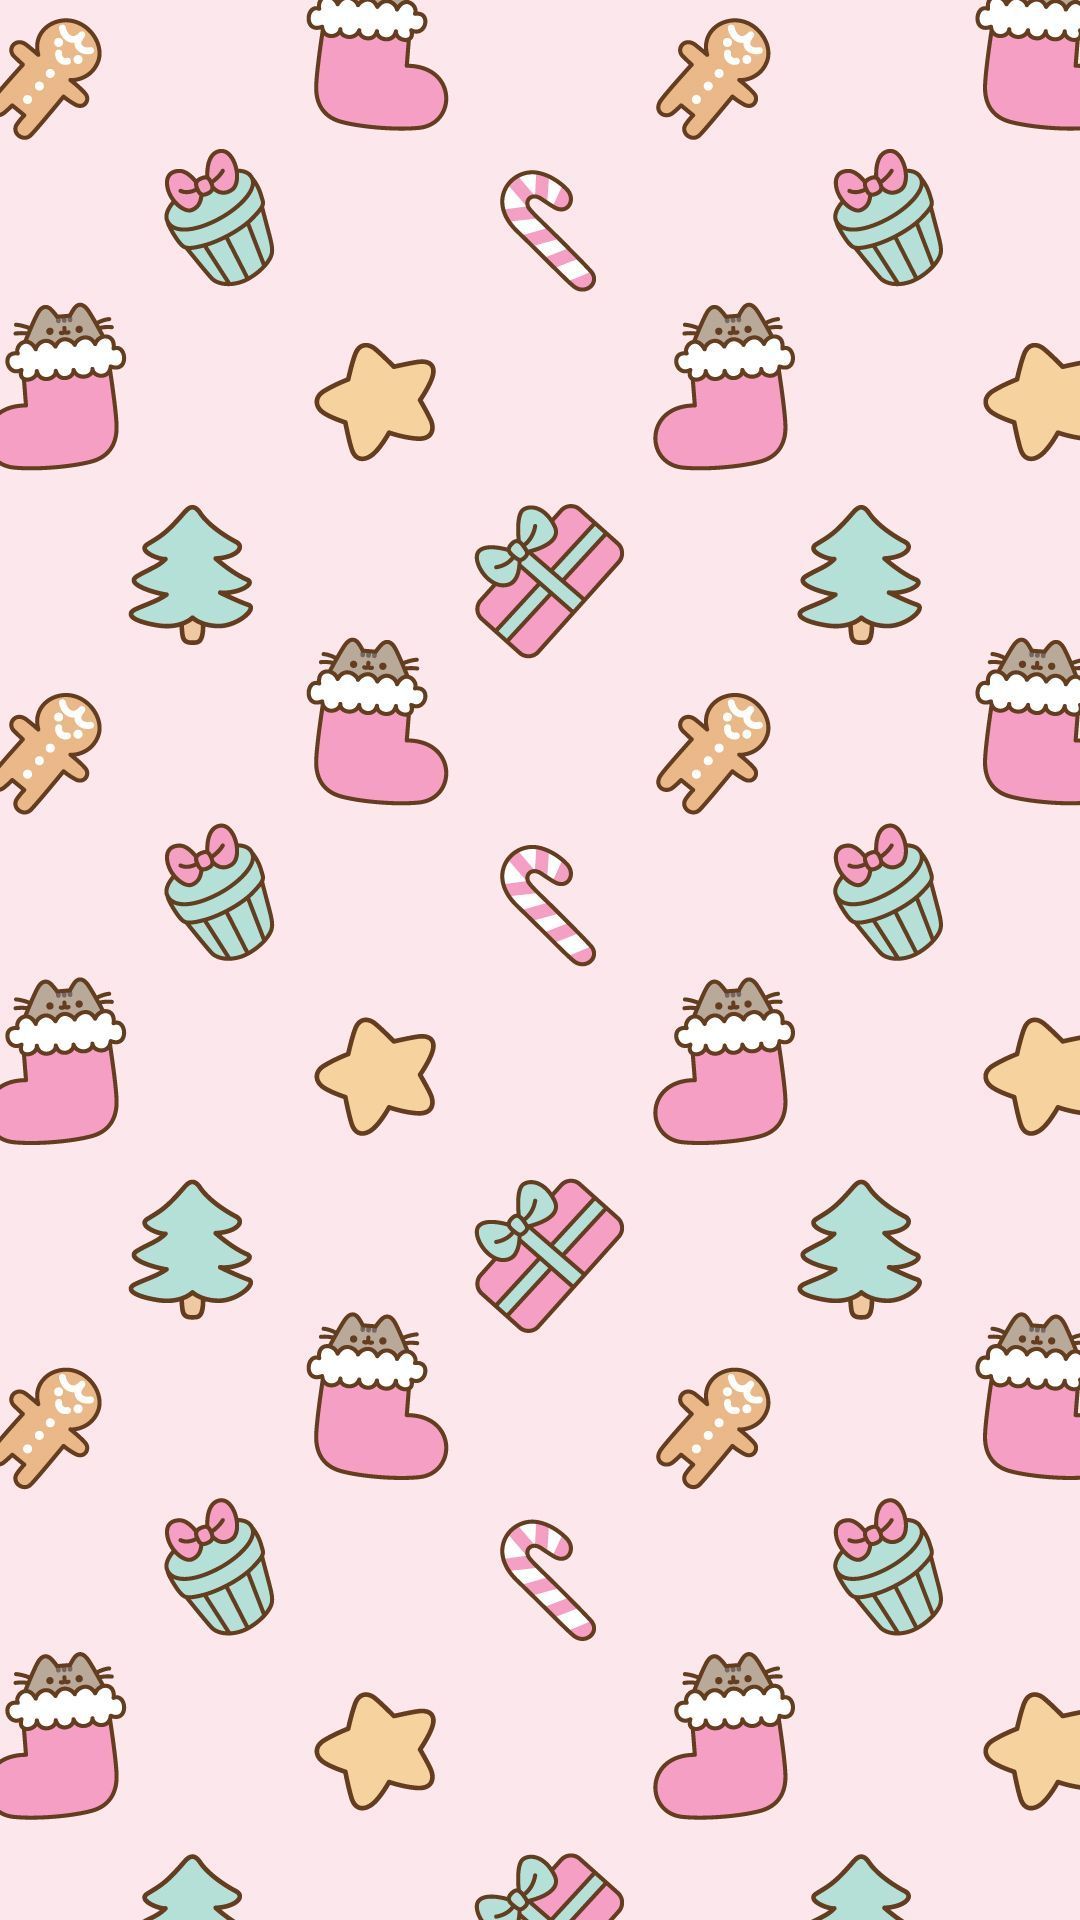 Android Pusheen Free Christmas Wallpaper #iPhoneWallpaper. Wallpaper iphone christmas, Christmas phone wallpaper, Cute christmas wallpaper